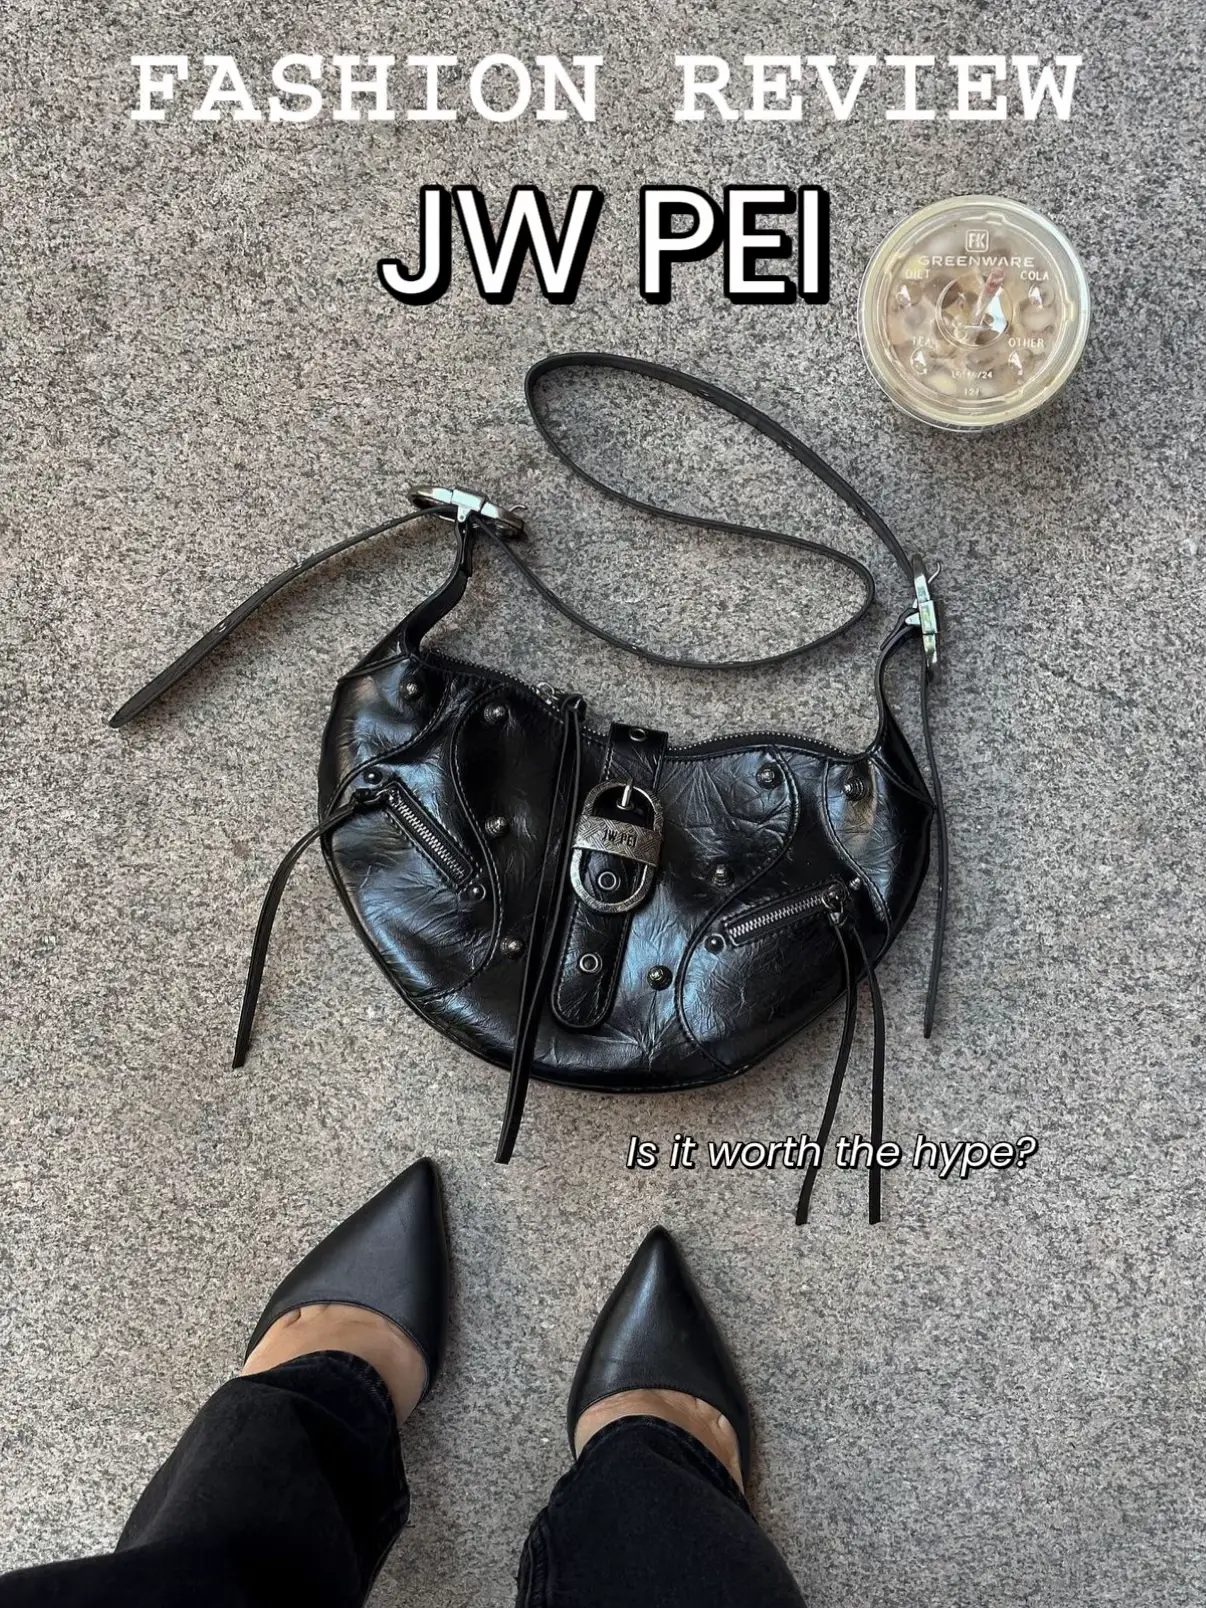 What To Know About Jw Pei: Brand History, Prices, Items